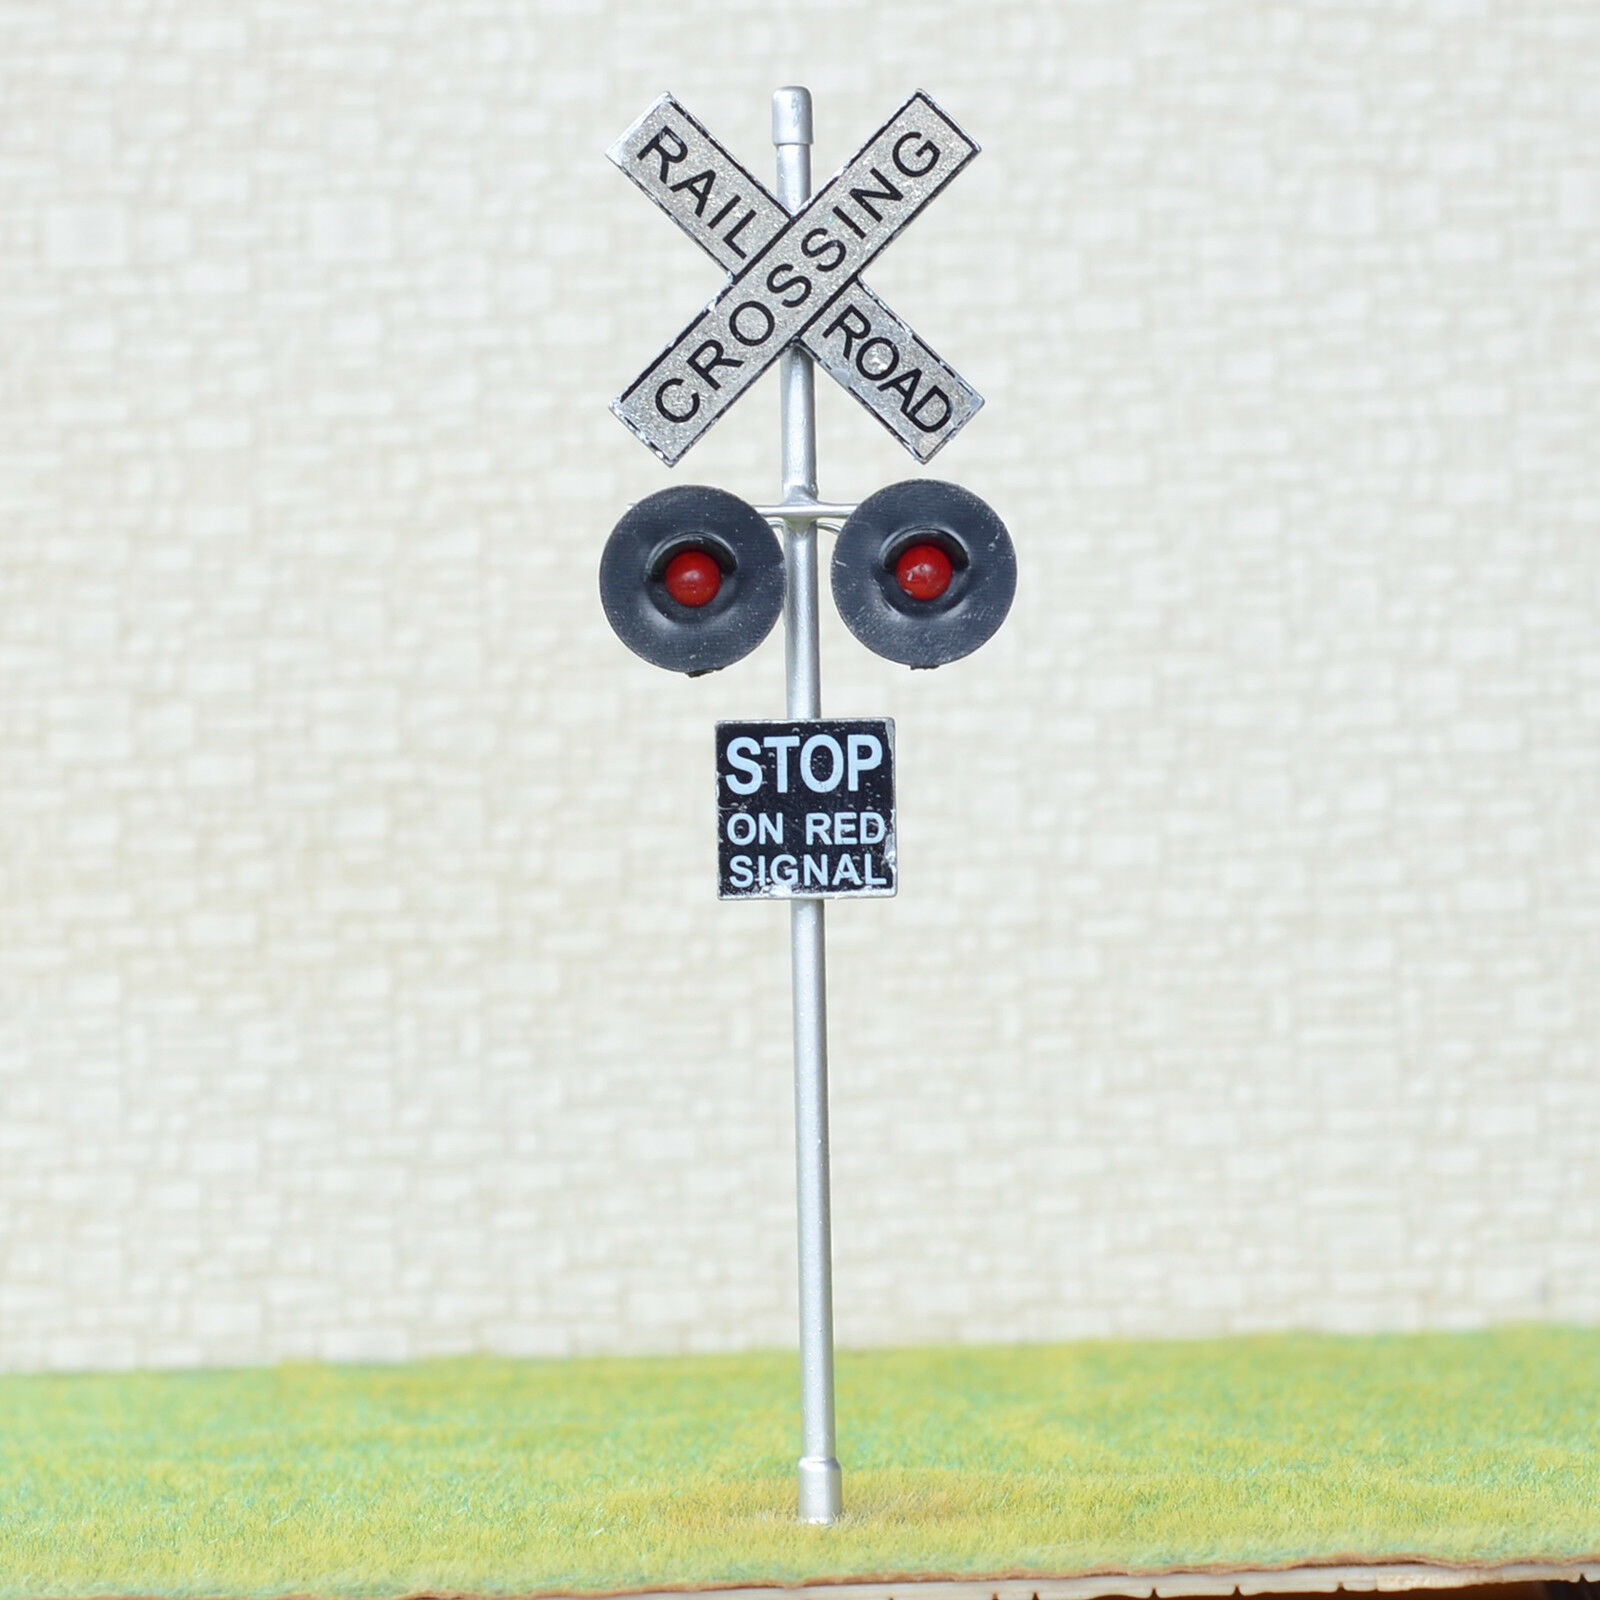 1 X O Scale Railroad Crossing Signals Led Made 2 Target Faces Silver #48sl2